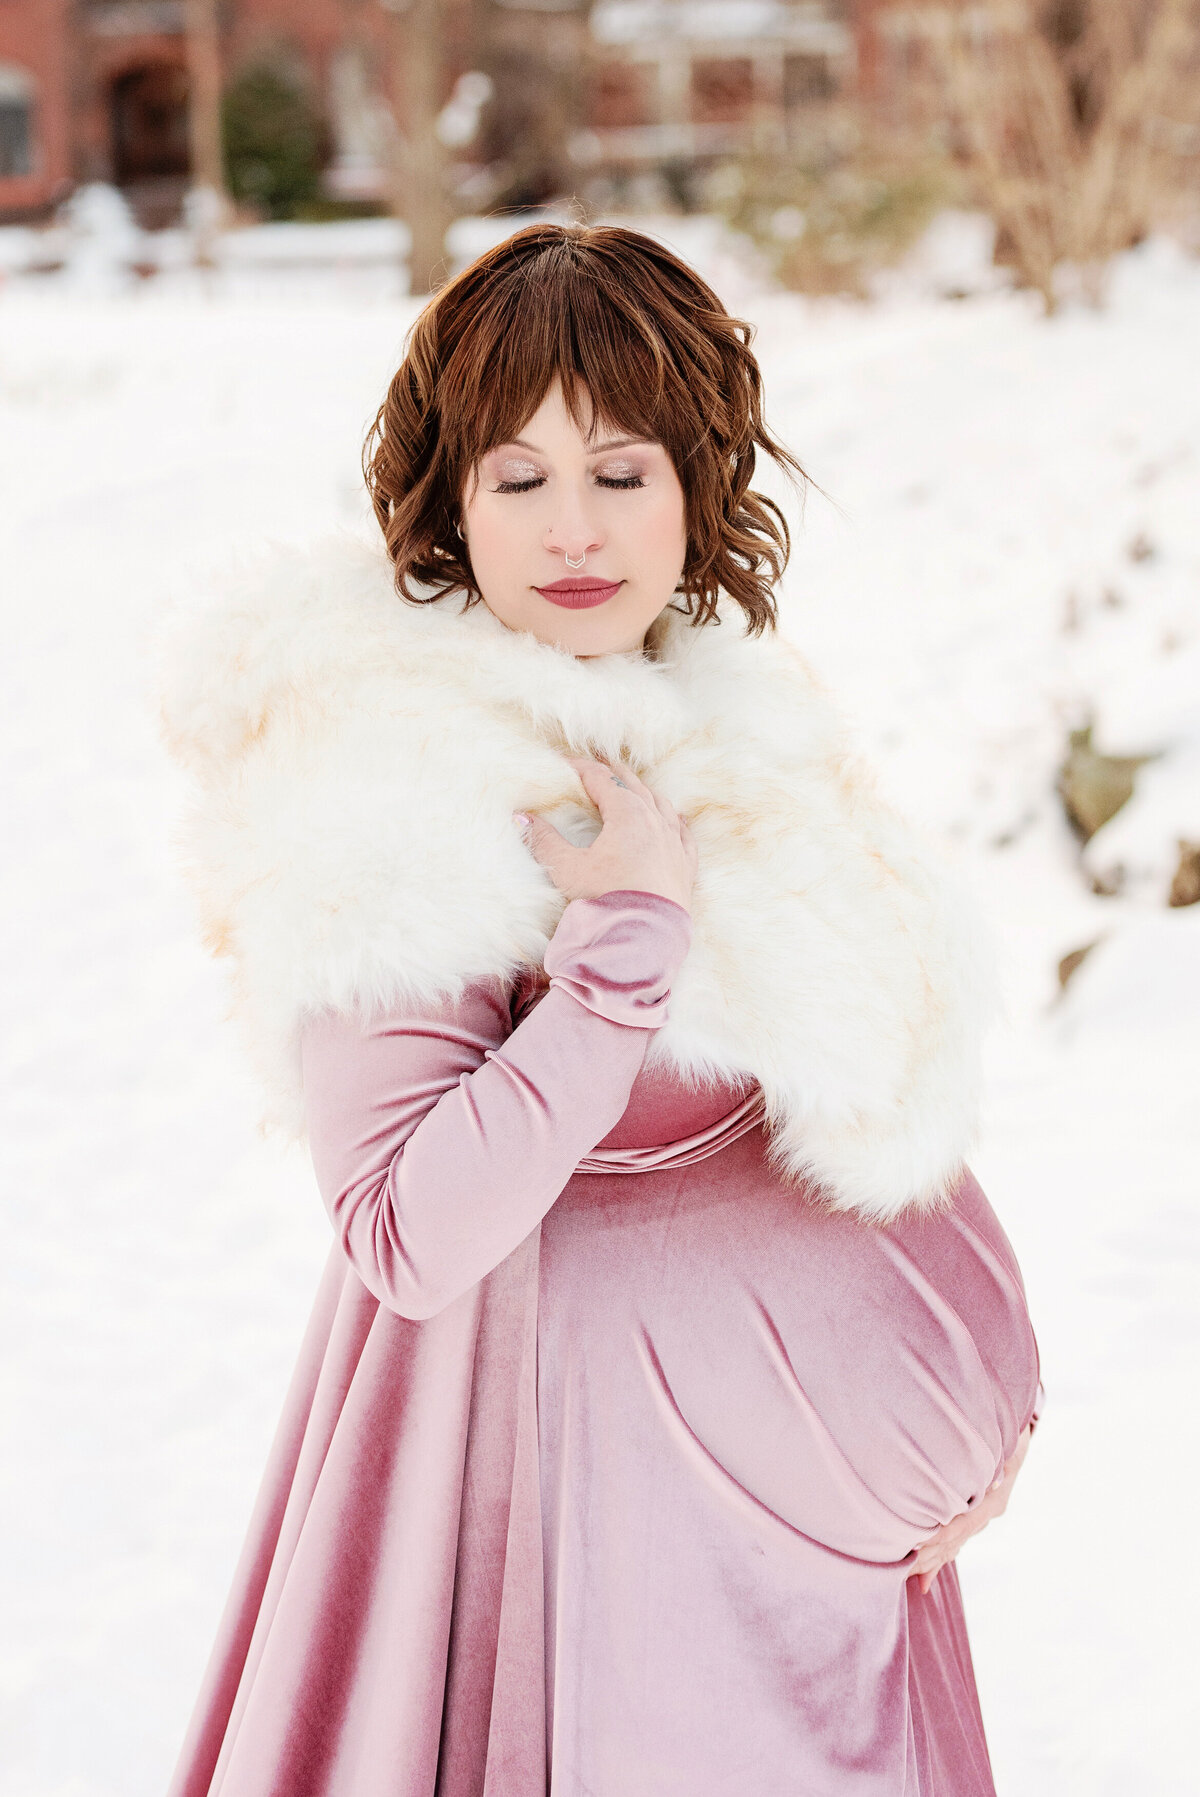 st-louis-maternity-photographer-expecting-mother-posed-holding-belly-in-pink-velvet-gown-wth-white-fur-against-white-snowy-background